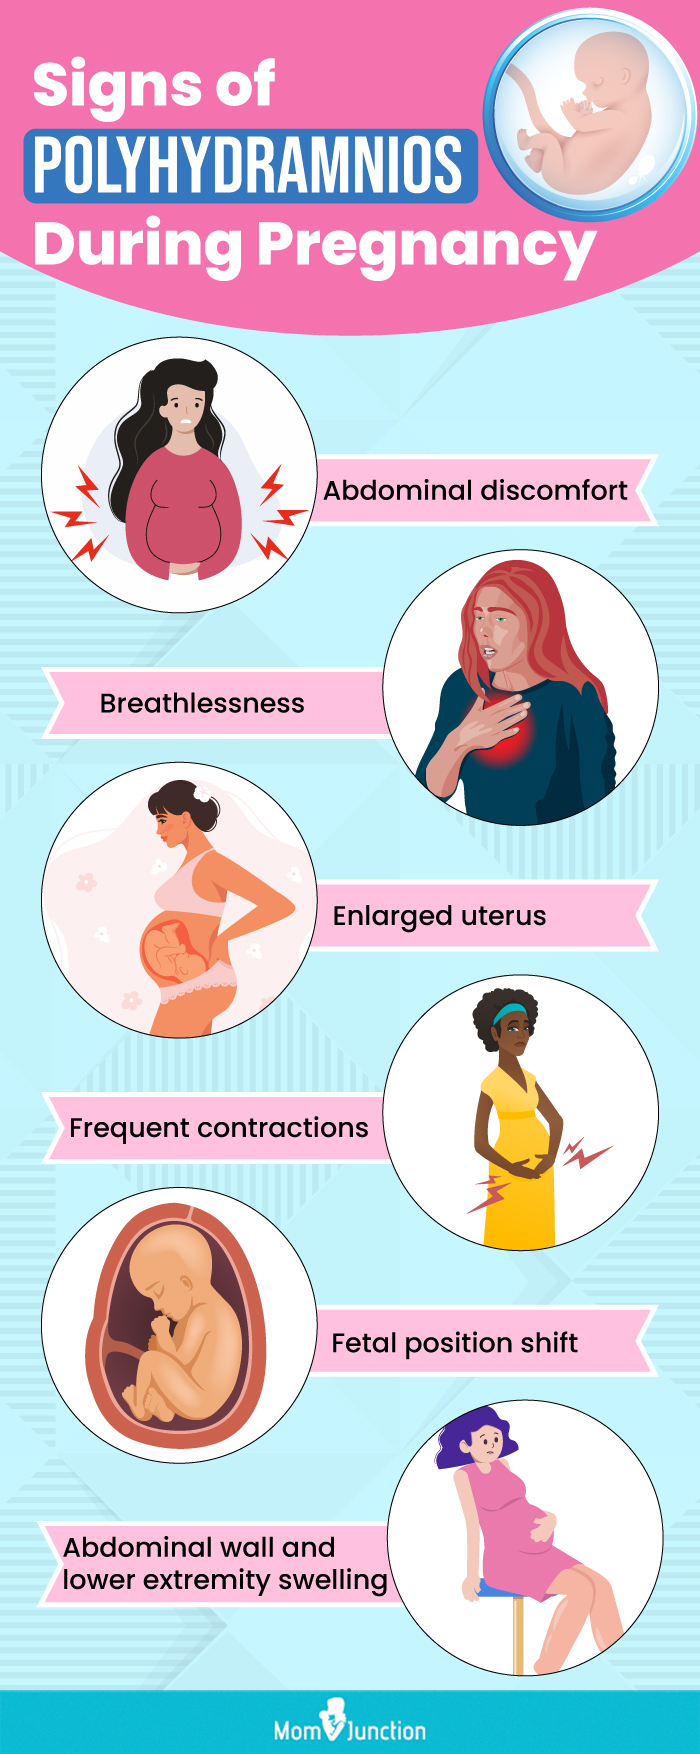 signs of polyhydramnios during pregnancy (infographic)